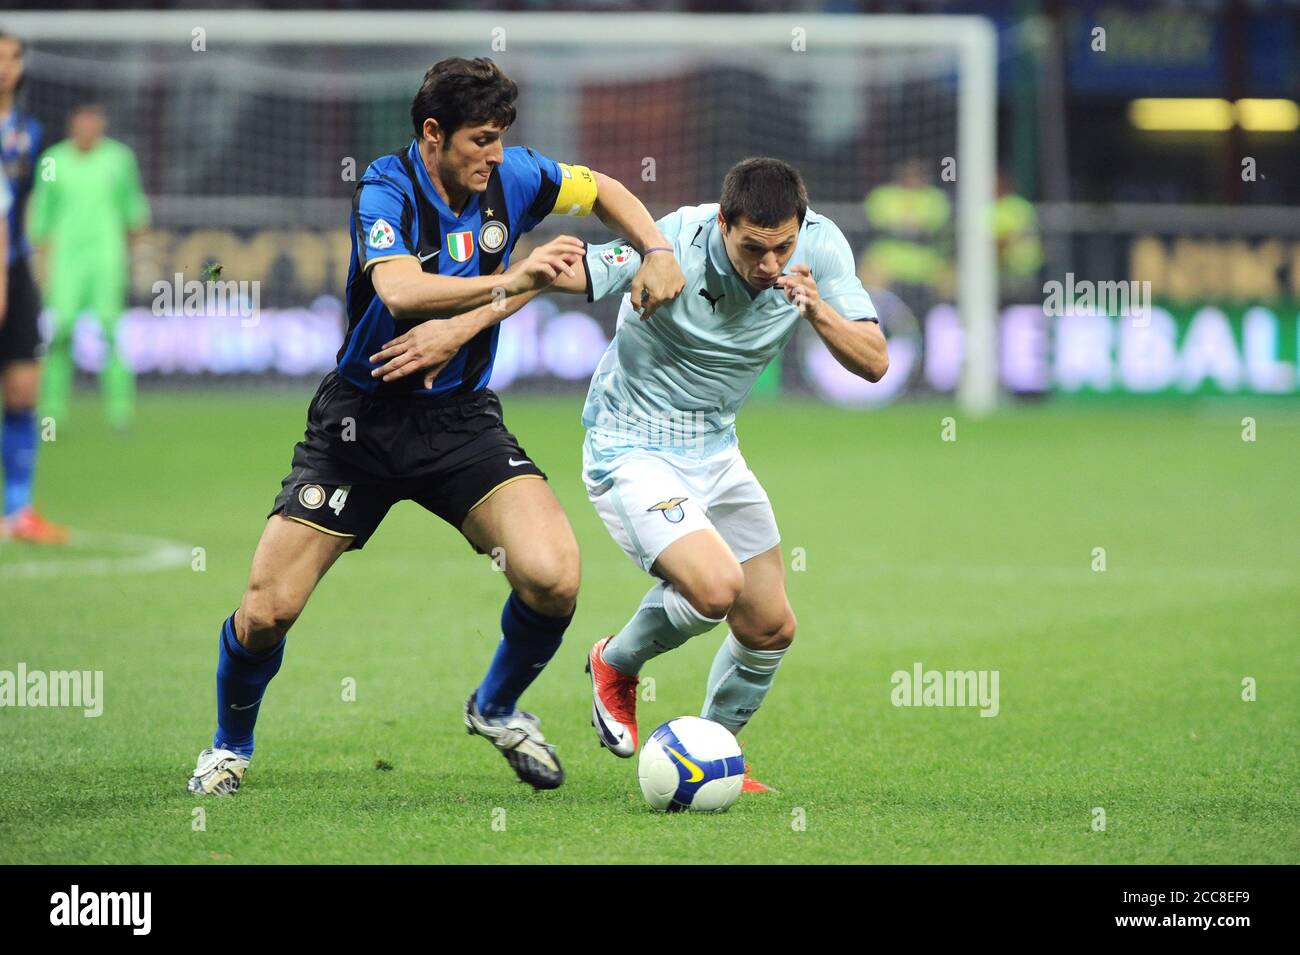 Milan Italy, 02 May 2009, "G.MEAZZA SAN SIRO " Stadium, Serious Football  Championship A 2008/2009, FC Inter - SS Lazio : Javier Zanetti and Mauro  Zarate in action during the match Stock Photo - Alamy